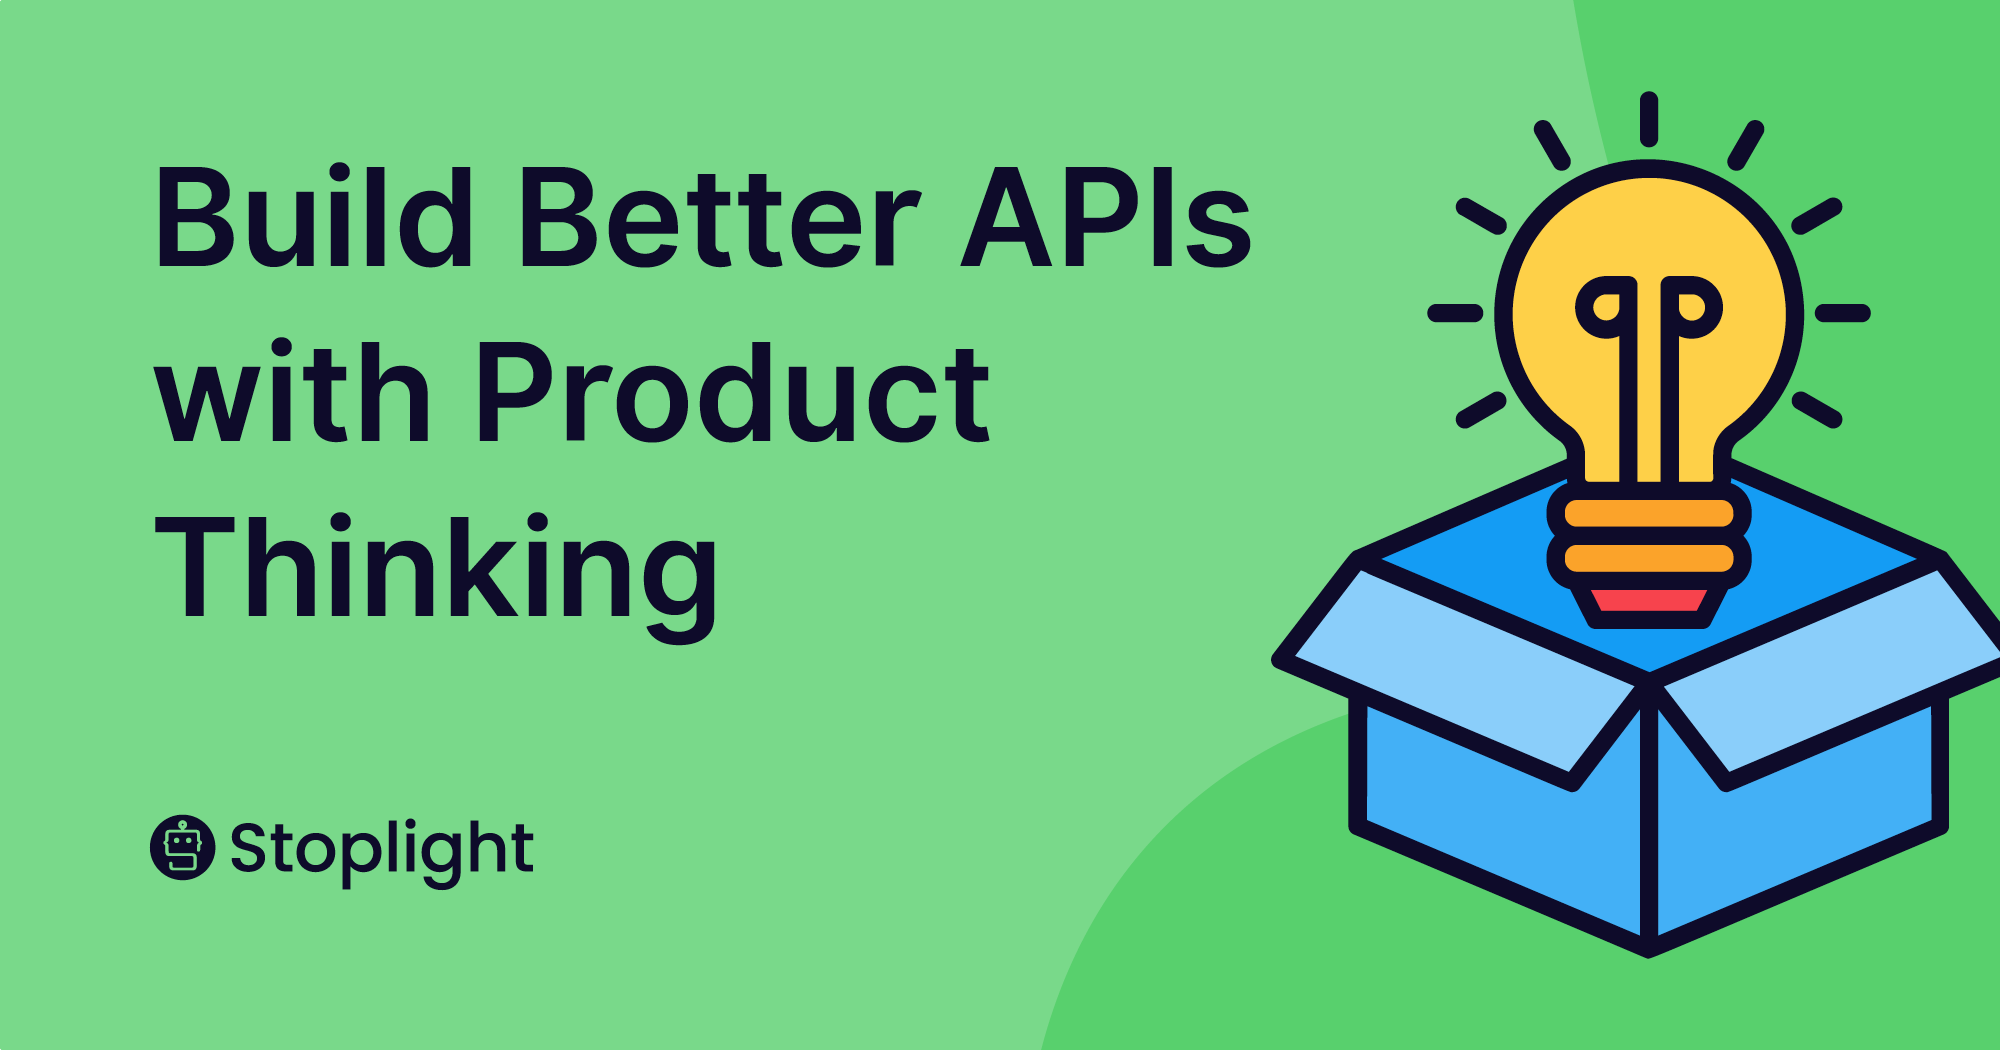 Building Better APIs: Why You Should Practice Product Thinking